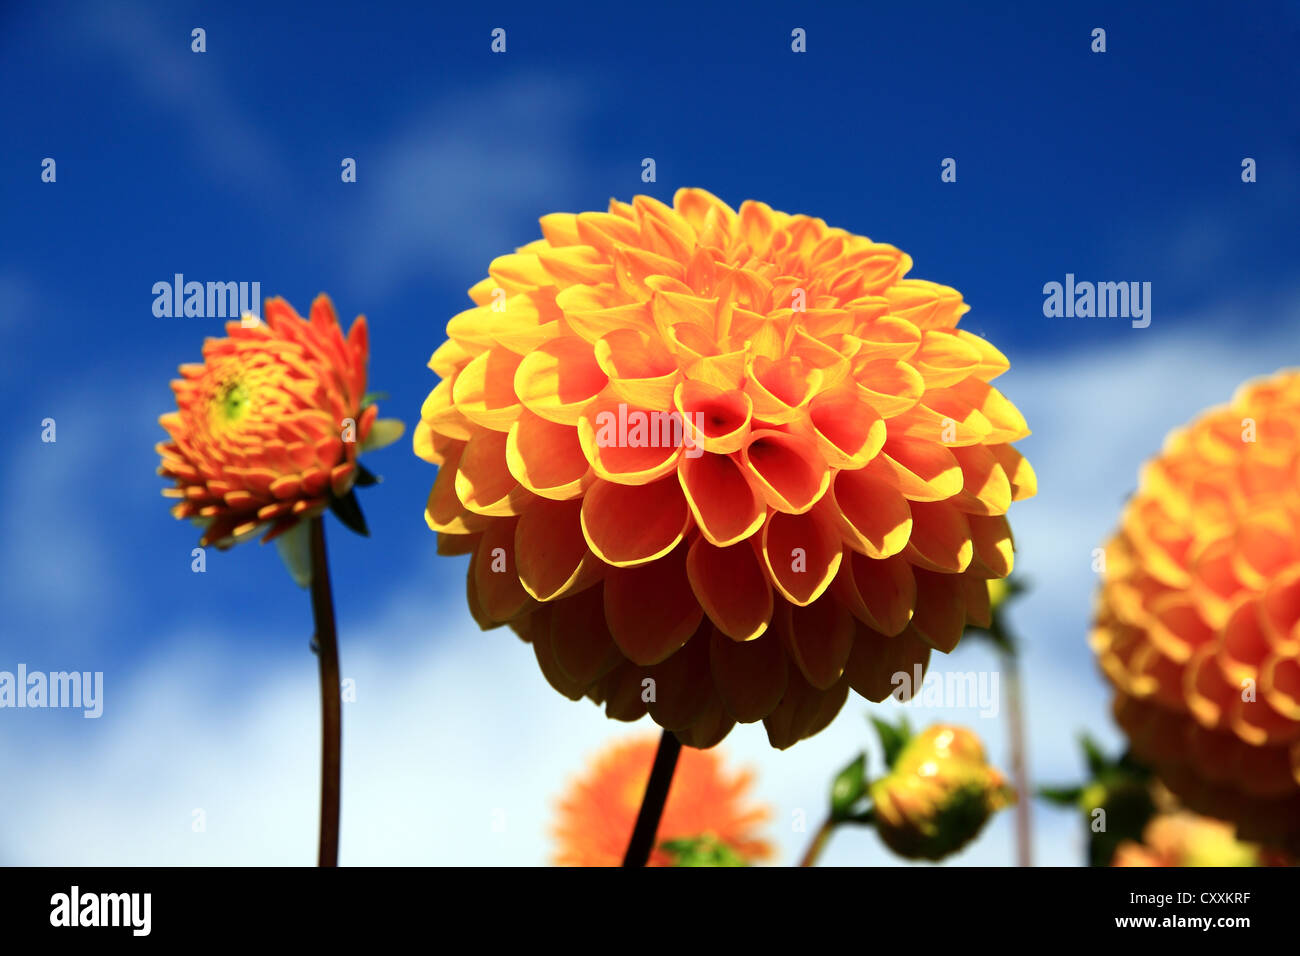 Blue Sky with Dahlia in Foreground Stock Photo